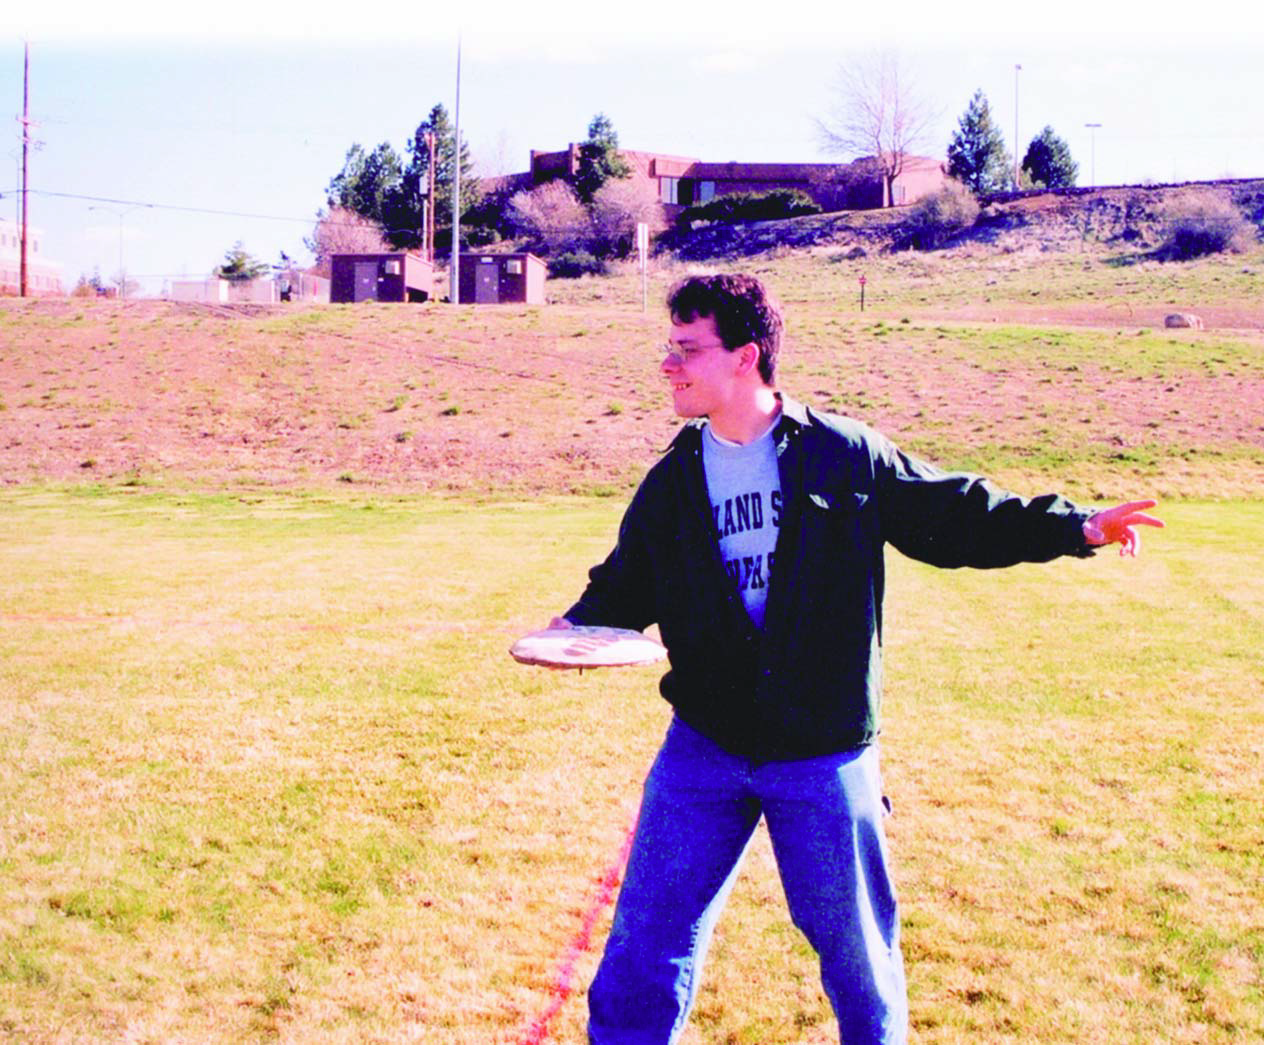 A student takes a concrete frisbee for a test run.